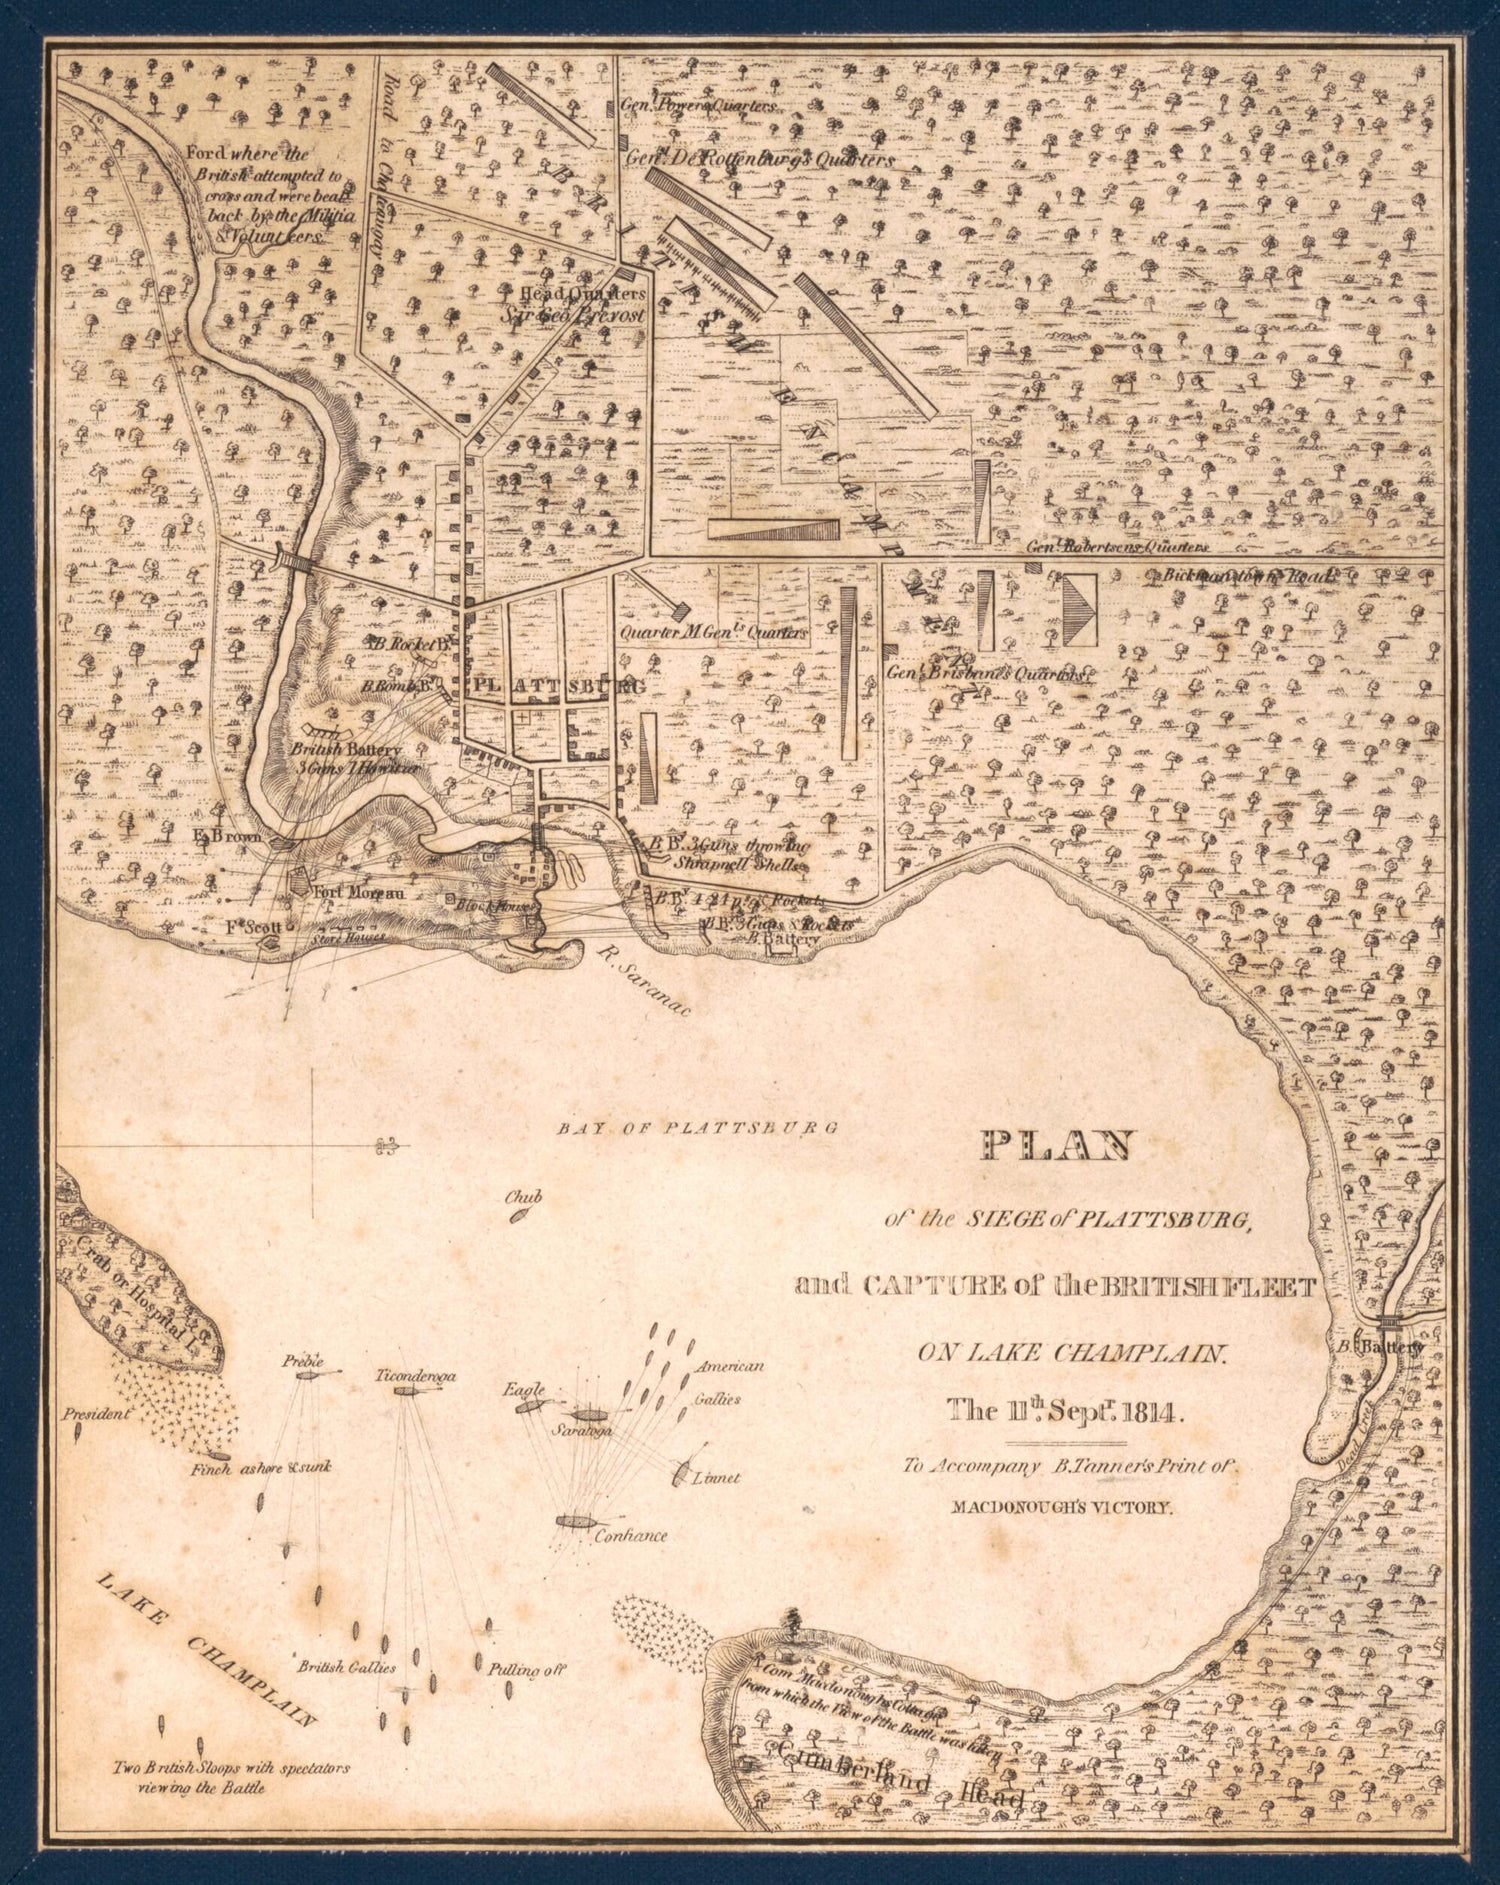 This old map of Plan of the Siege of Plattsburg and Capture of the British Fleet On Lake Champlain the 11th Sptr. from 1814 : to Accompany B. Tanner&